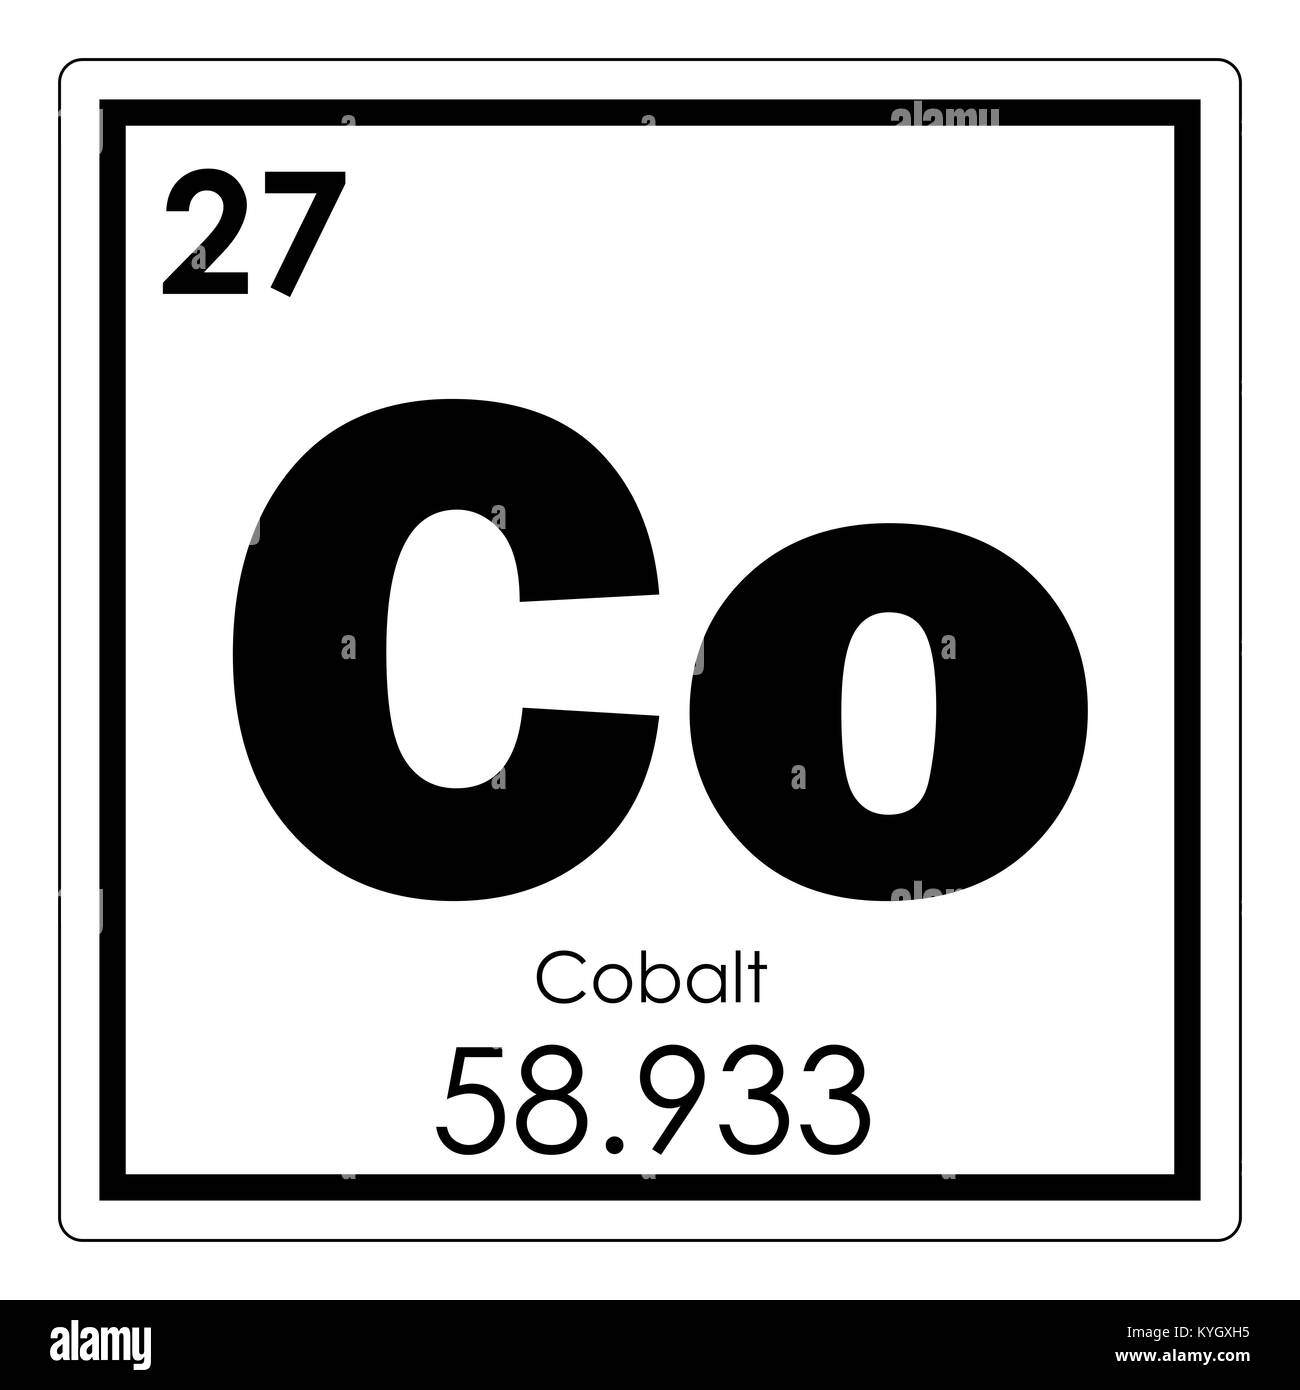 Cobalt chemical element periodic table science symbol Stock Photo